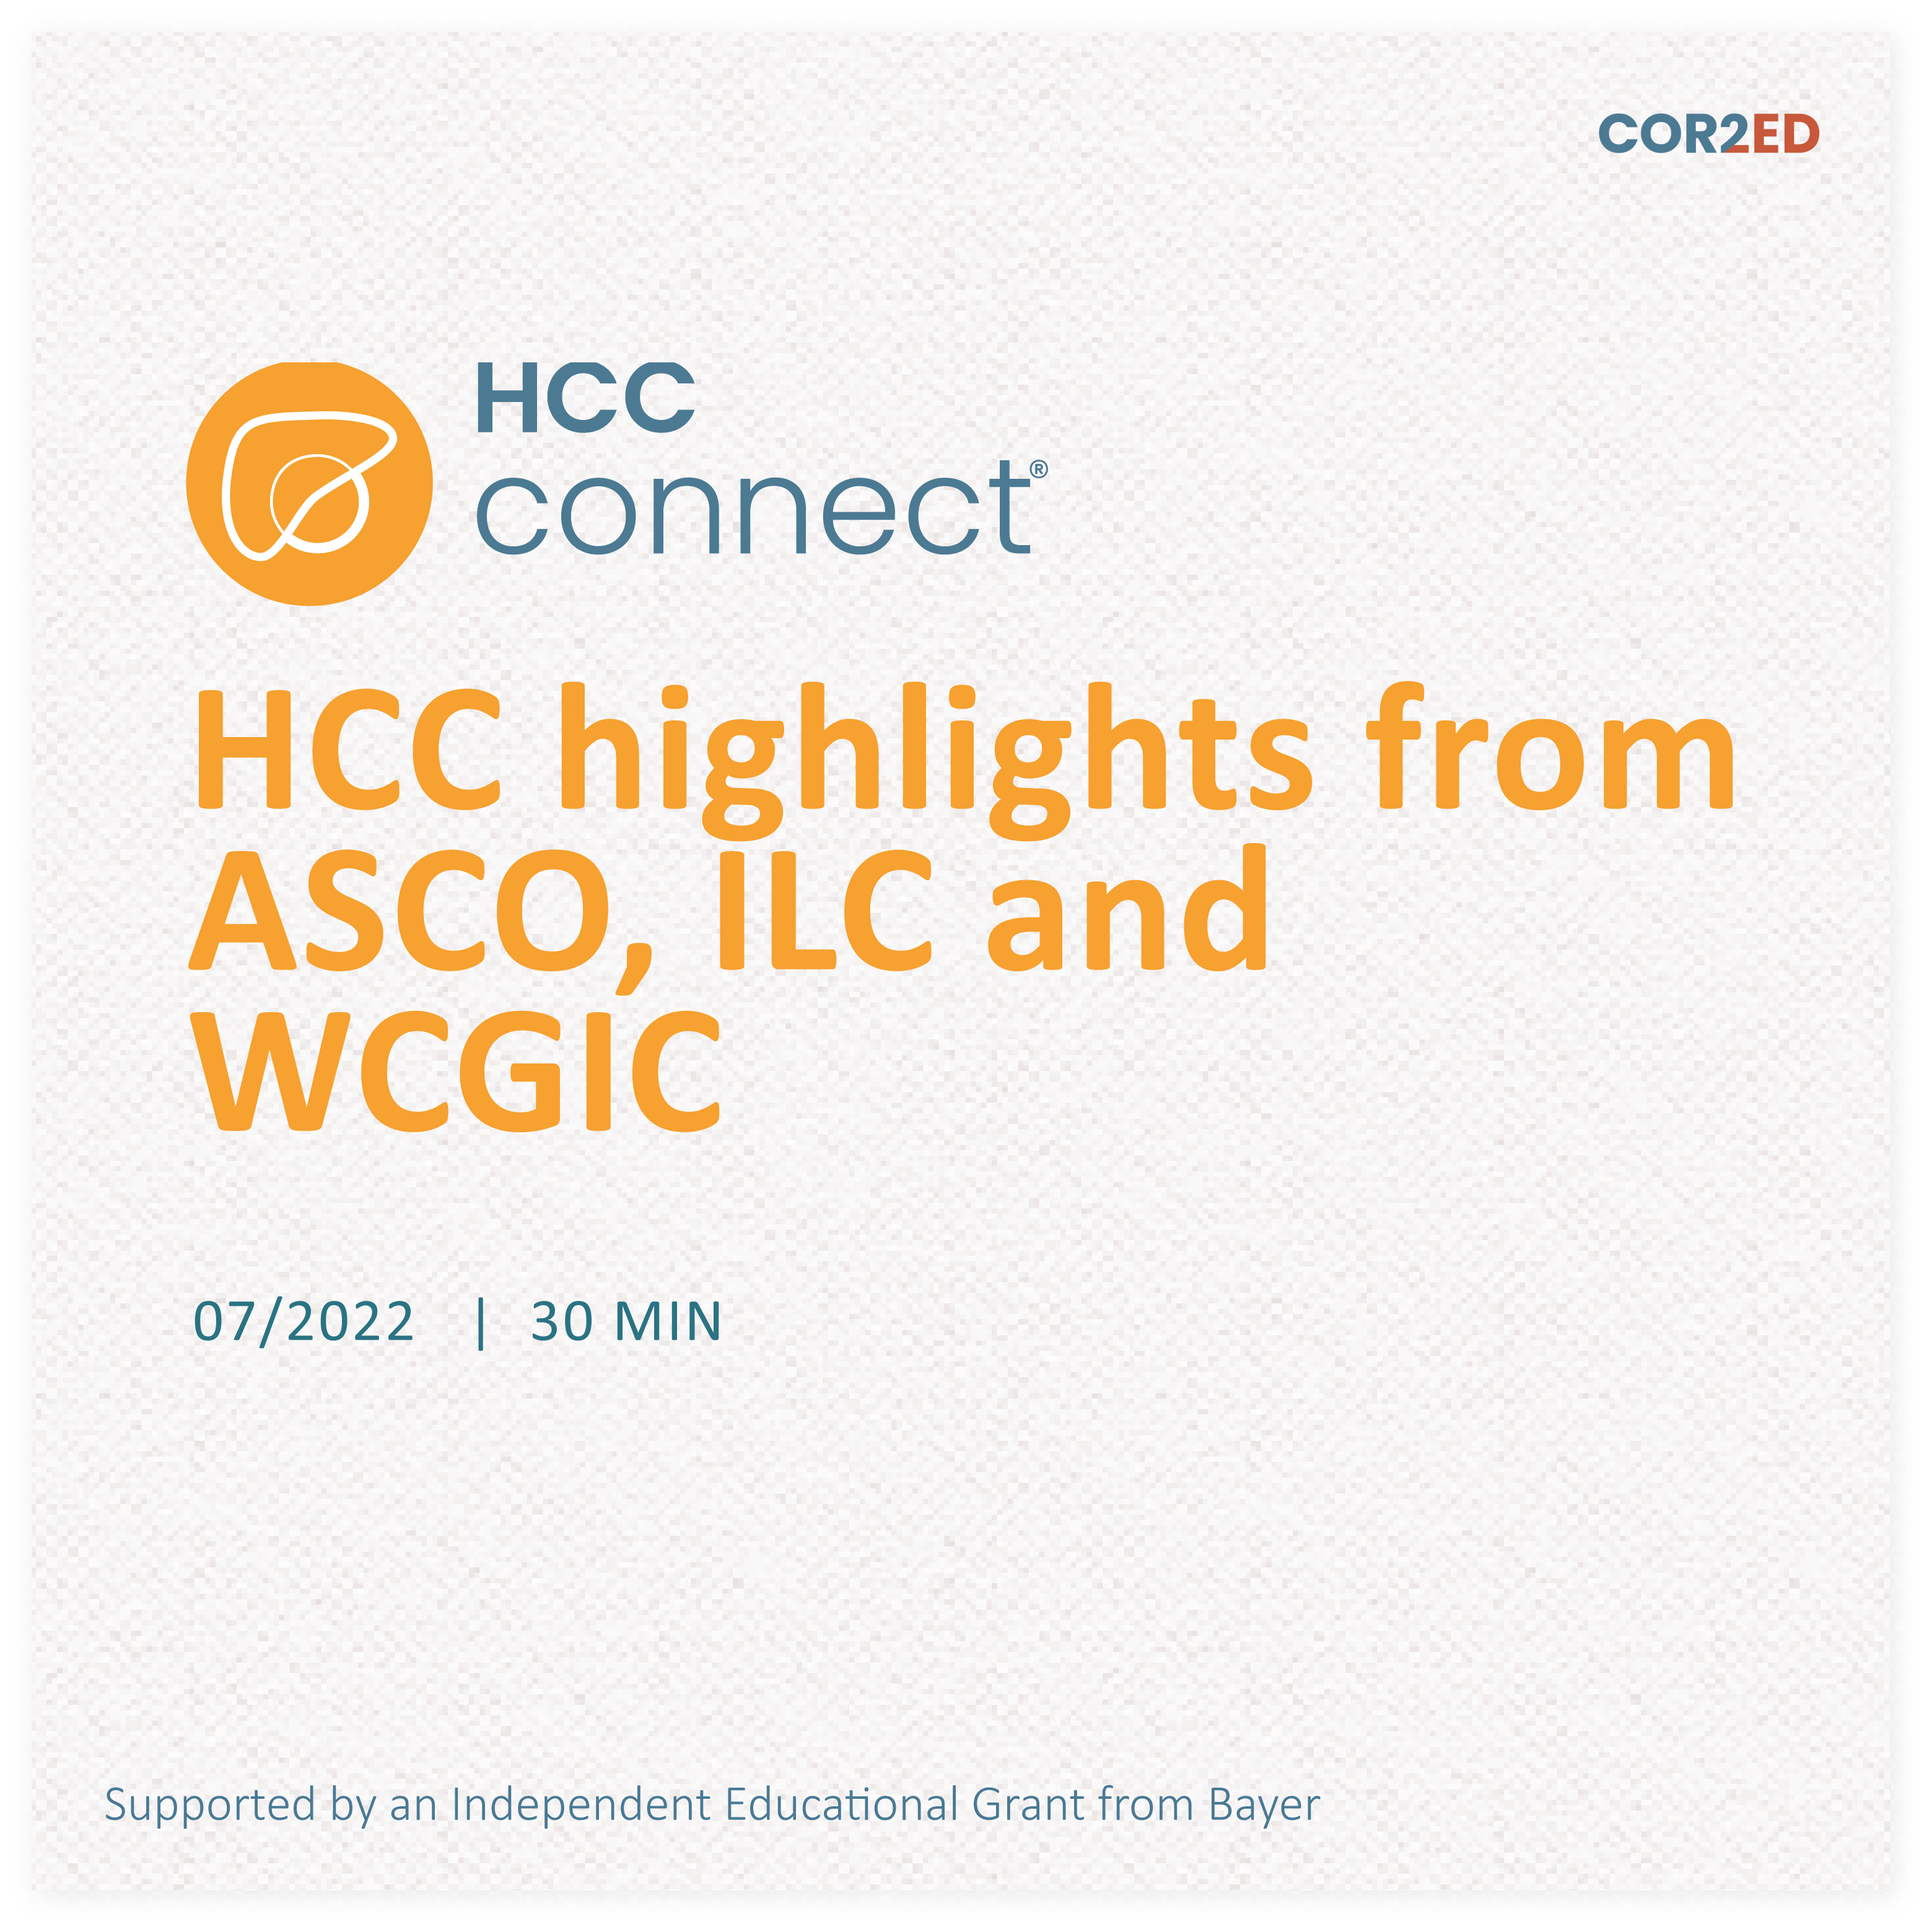 Role of immunotherapy beyond advanced HCC